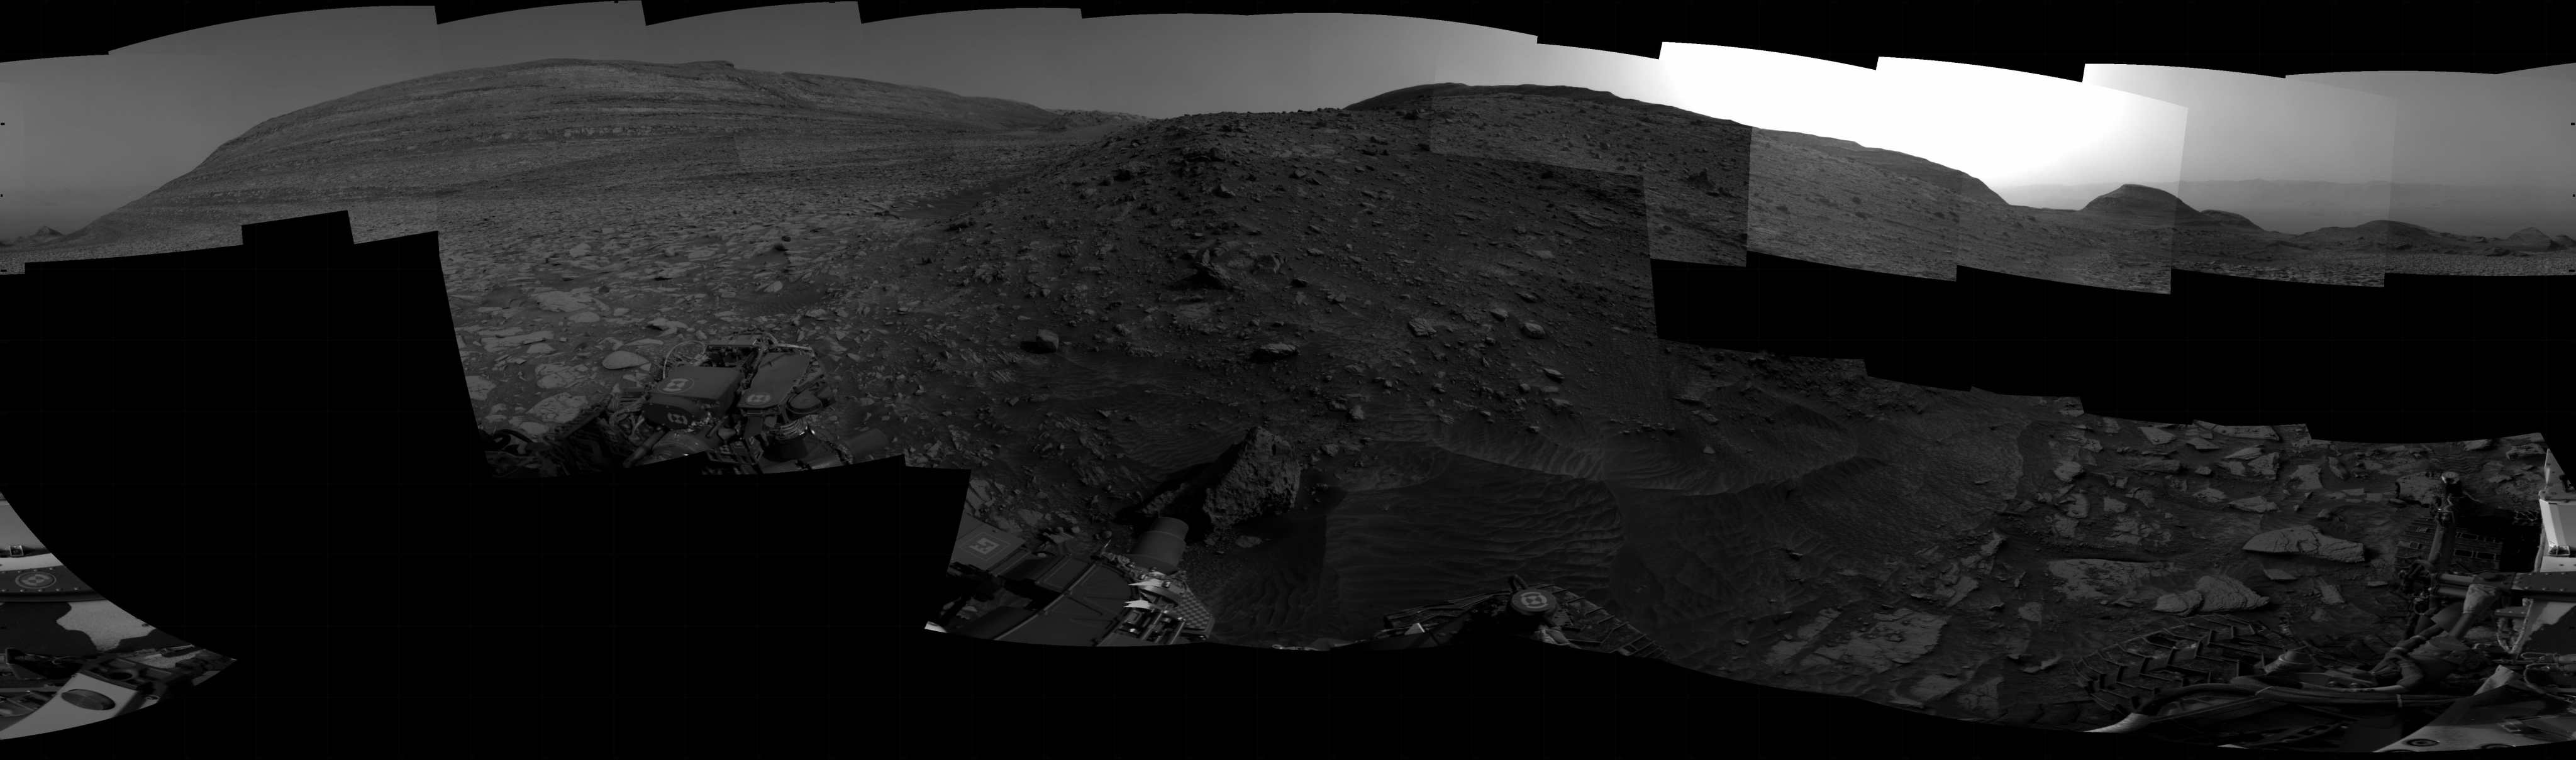 Curiosity took the images on April 26, 2024, Sol 4166 of the Mars Science Laboratory mission at drive 3182, site number 106. The local mean solar time for the image exposures was from 3 PM to 4 PM.